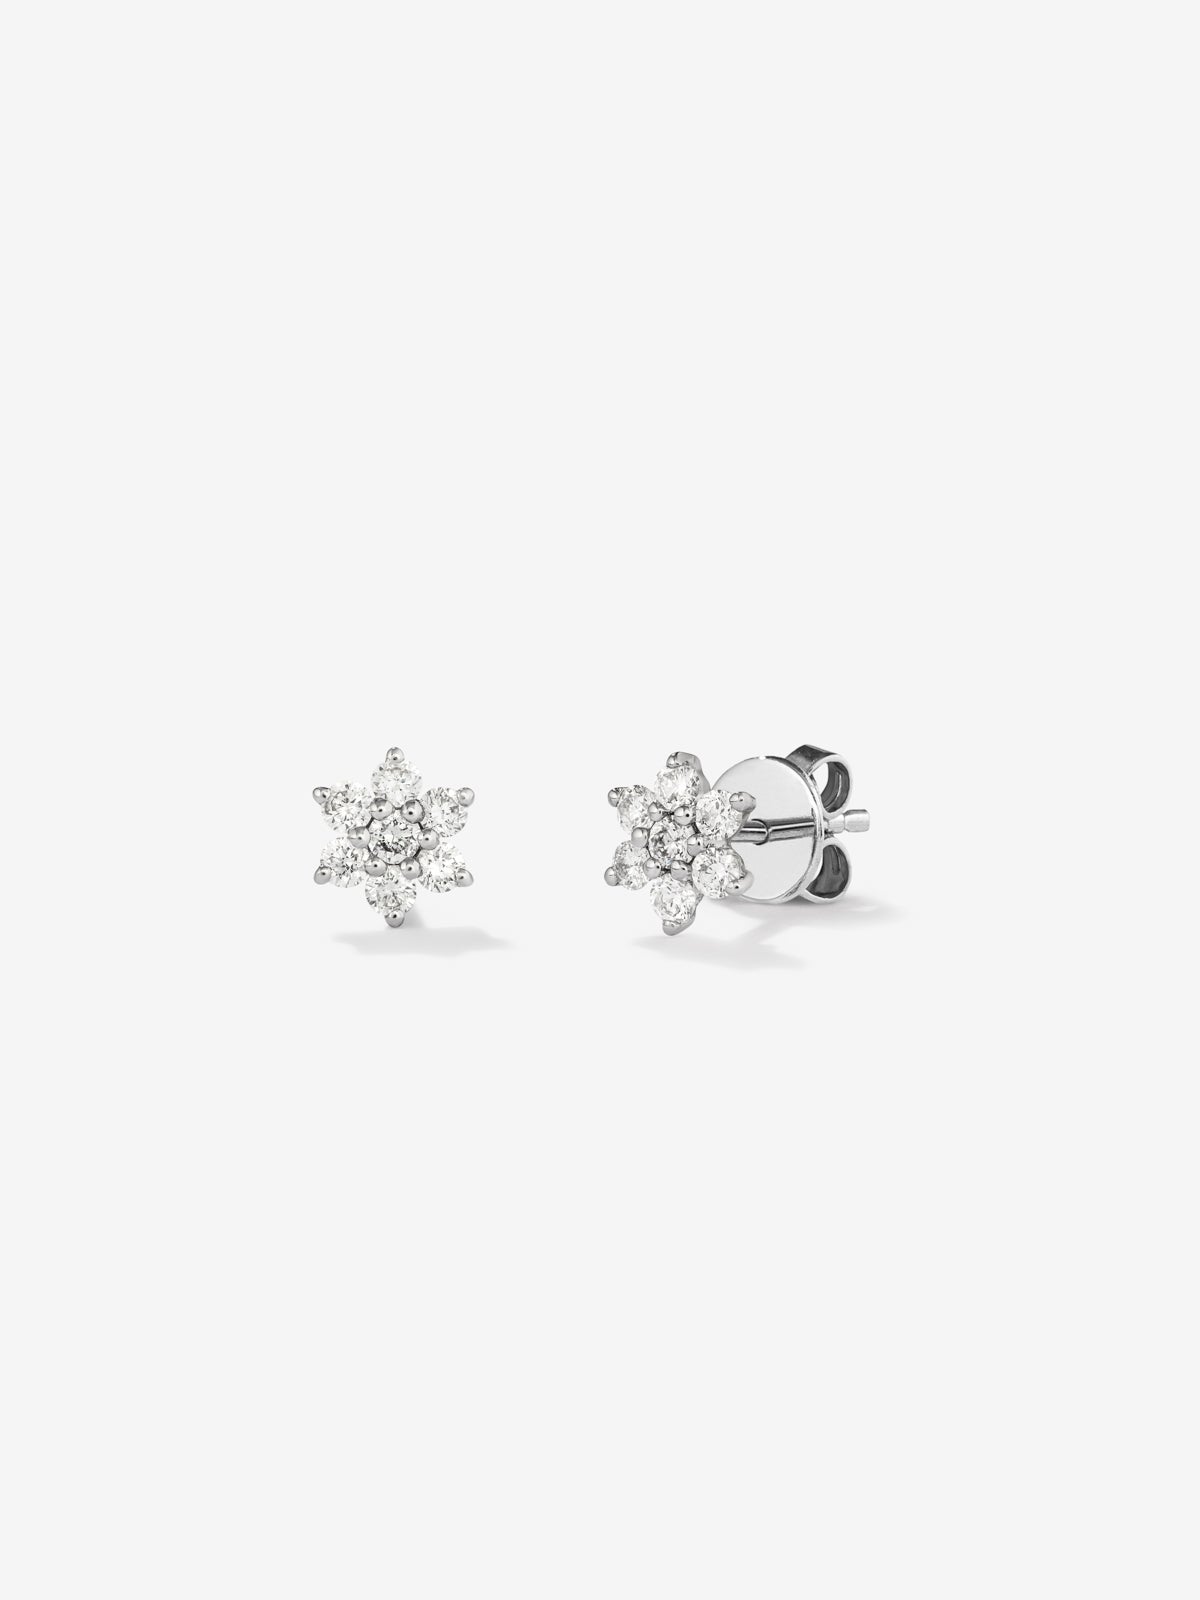 18K white gold earrings with diamonds in bright size of 0.14 CTS star -shaped